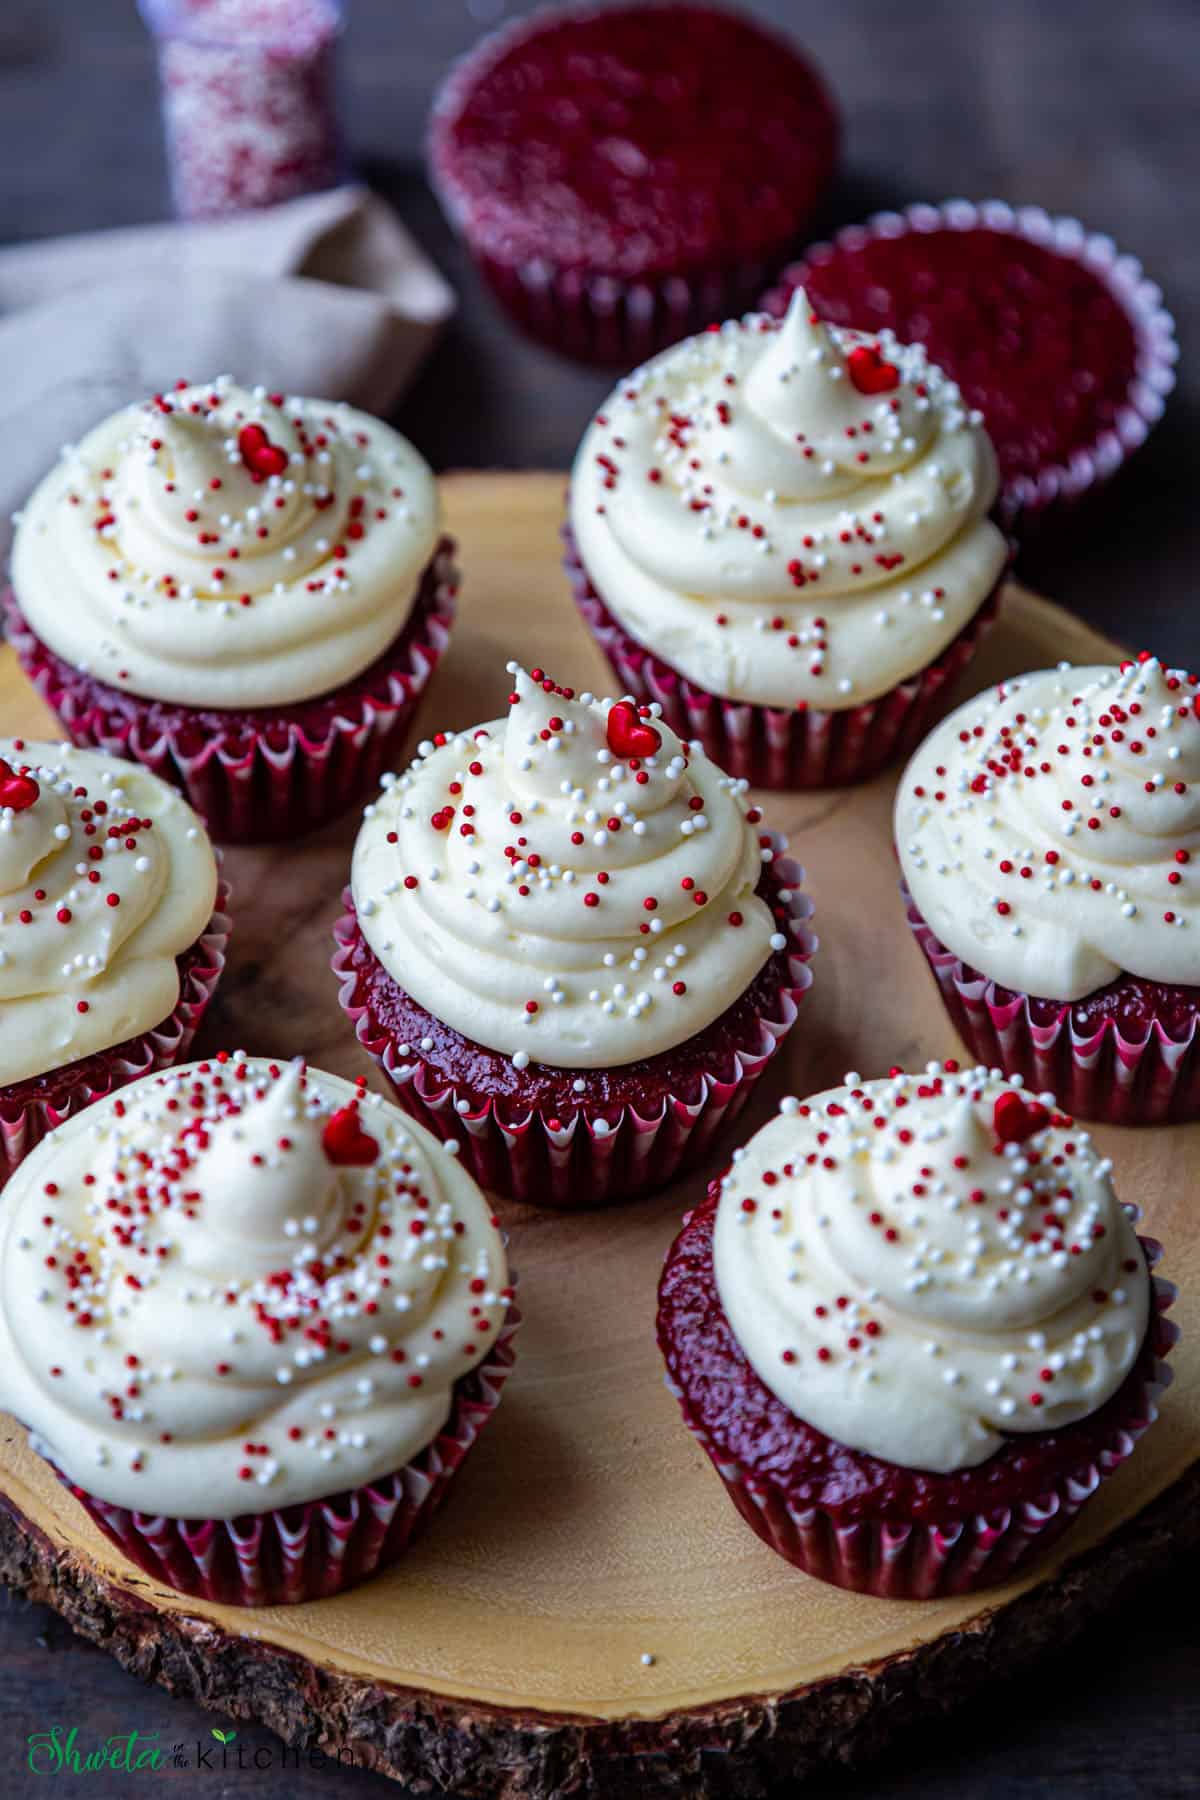 Red Velvet cupcakes on a wooden tray